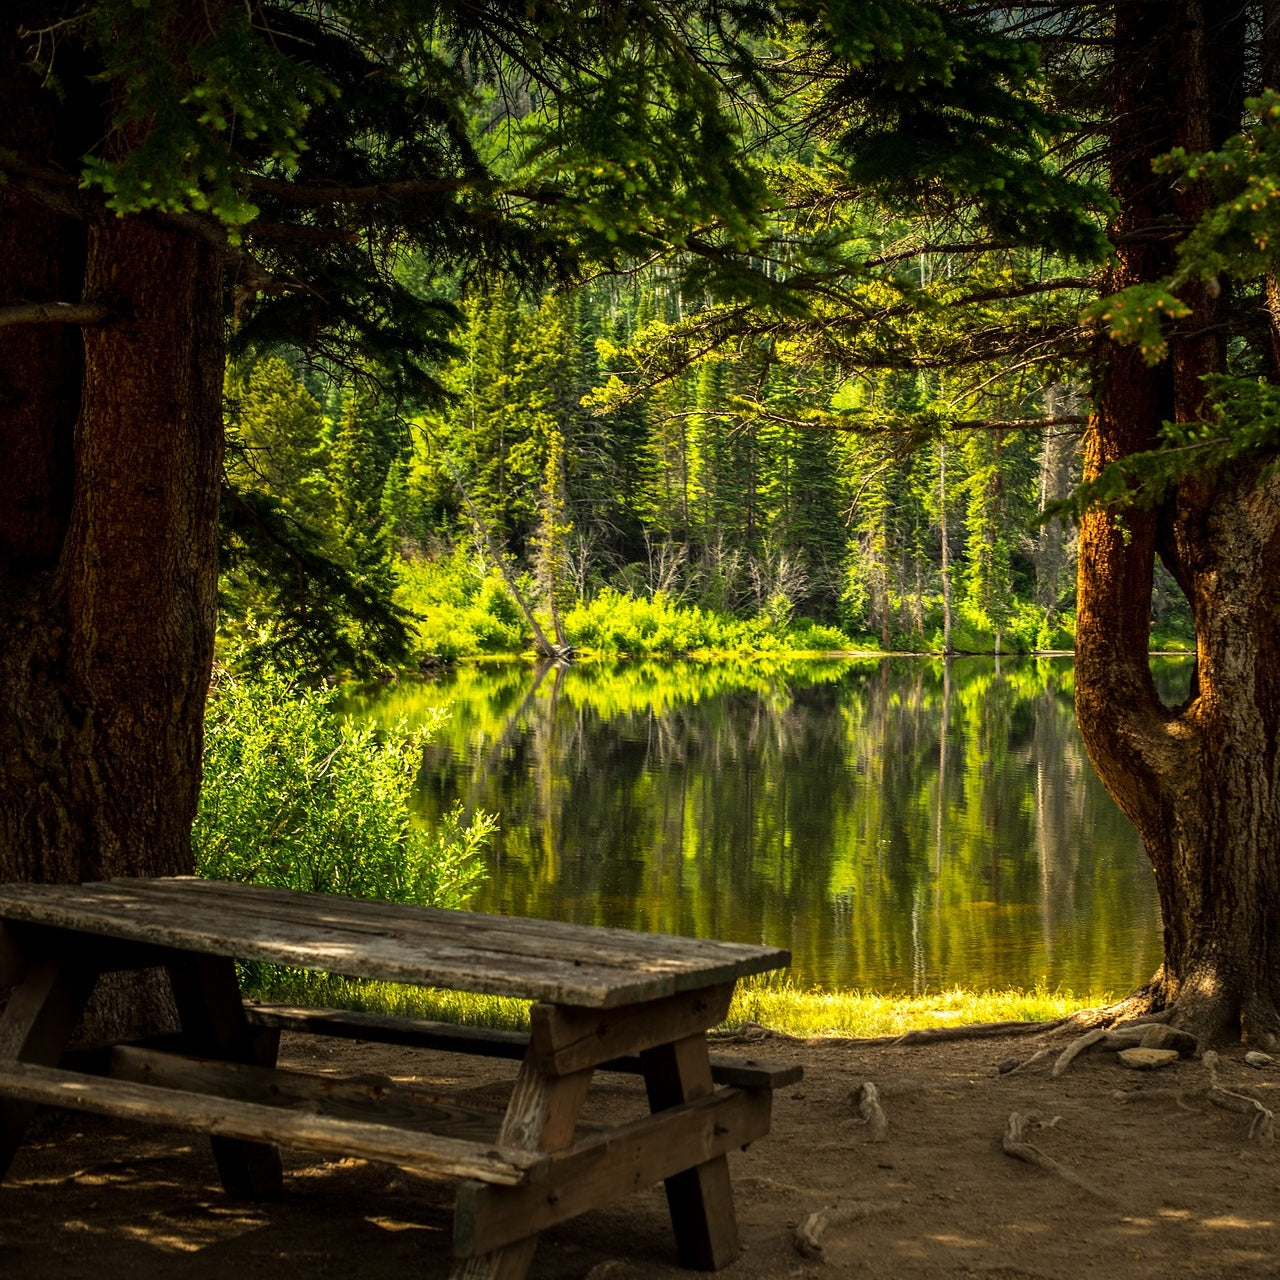 A picnic bench in the shade under a tree looking out to a calm woodland lake